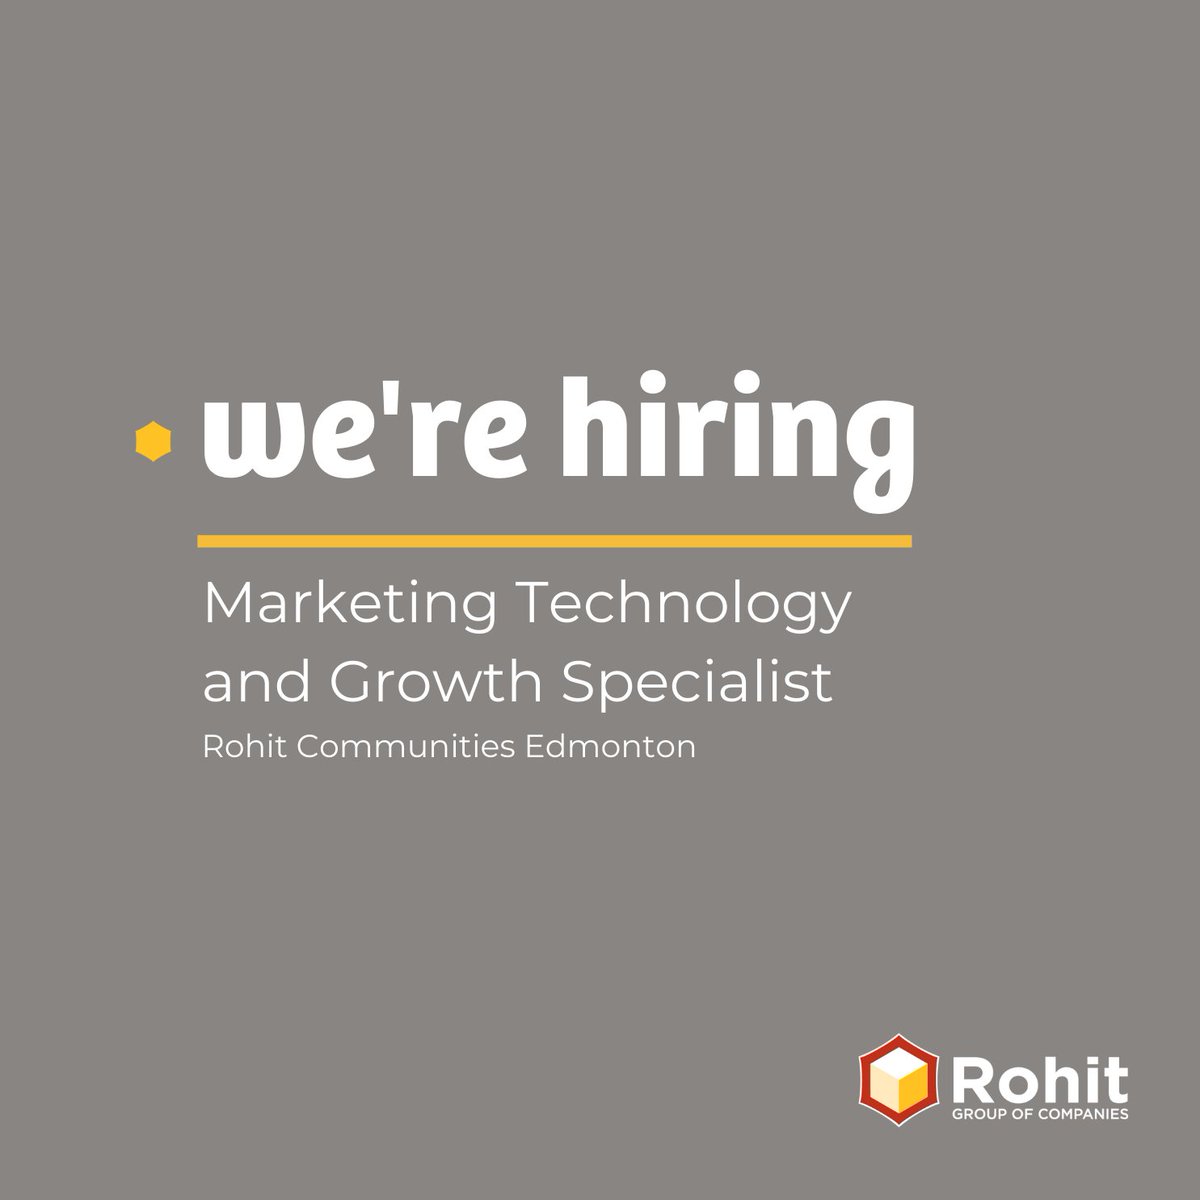 Our marketing team is expanding and we're currently seeking a Marketing Technology and Growth Specialist to join us at Rohit Communities Edmonton

Learn more and apply at rohitgroup.applytojob.com/apply/jobs/det…

#EdmontonHiring #EdmontonMarketing #YegTech #EdmontonTechJobs #yegjobs